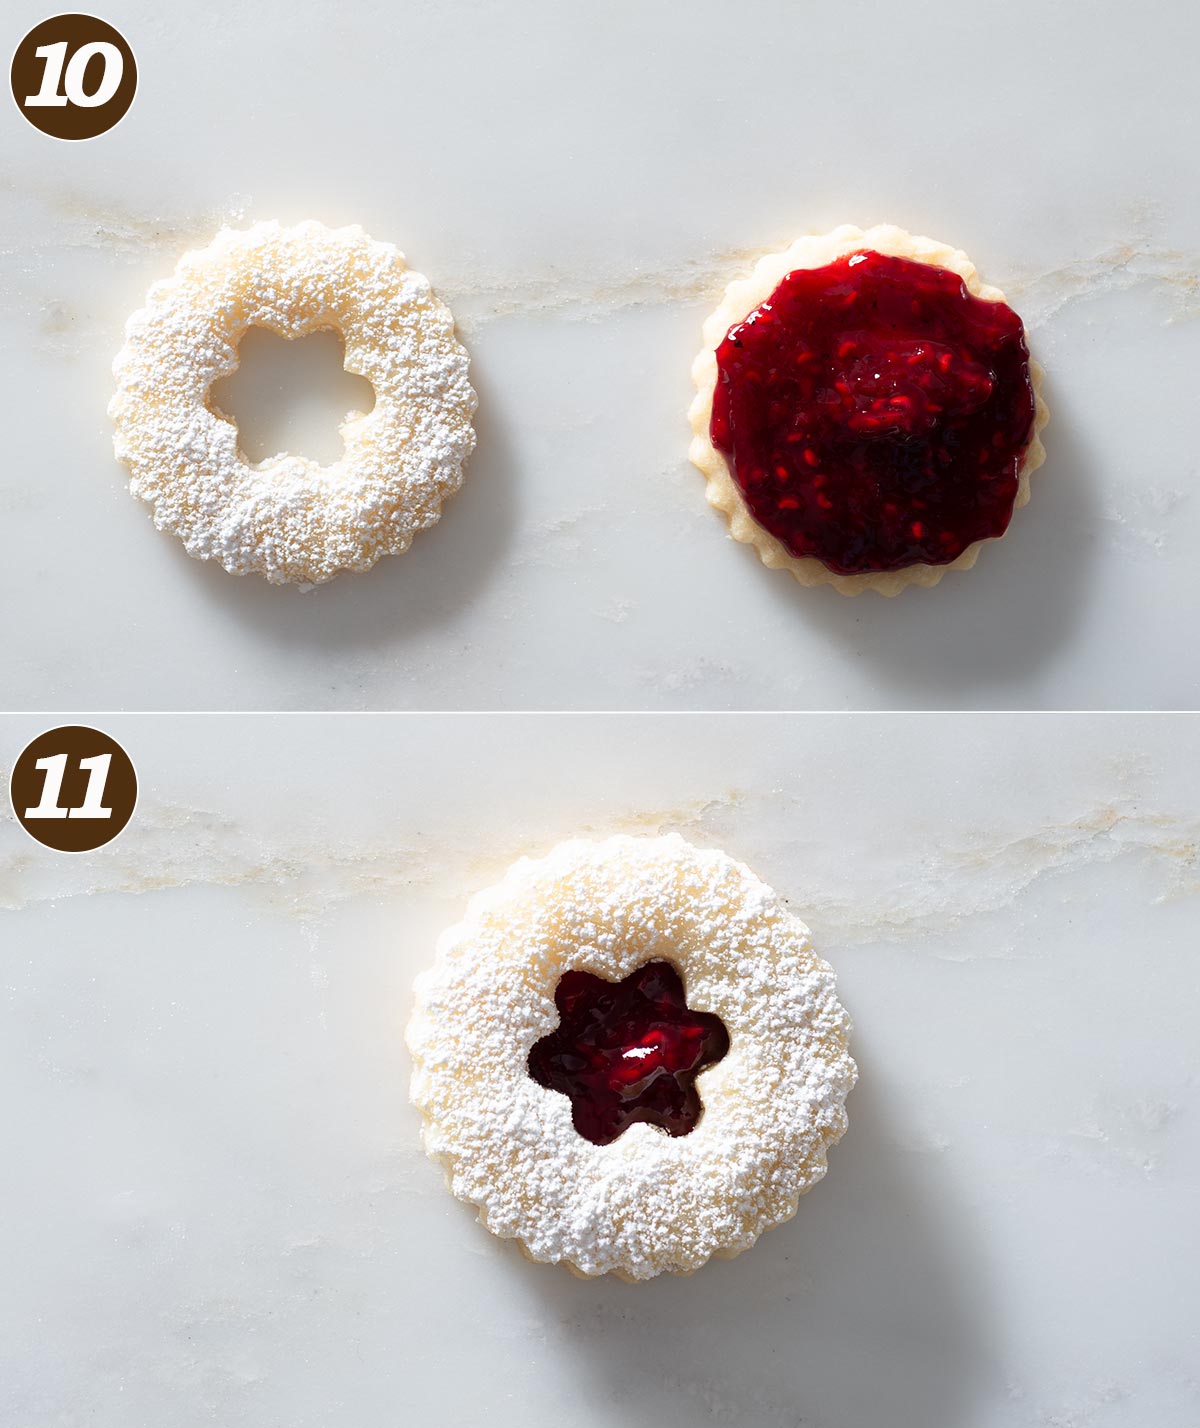 A Linzer cookie filled with raspberry jam.